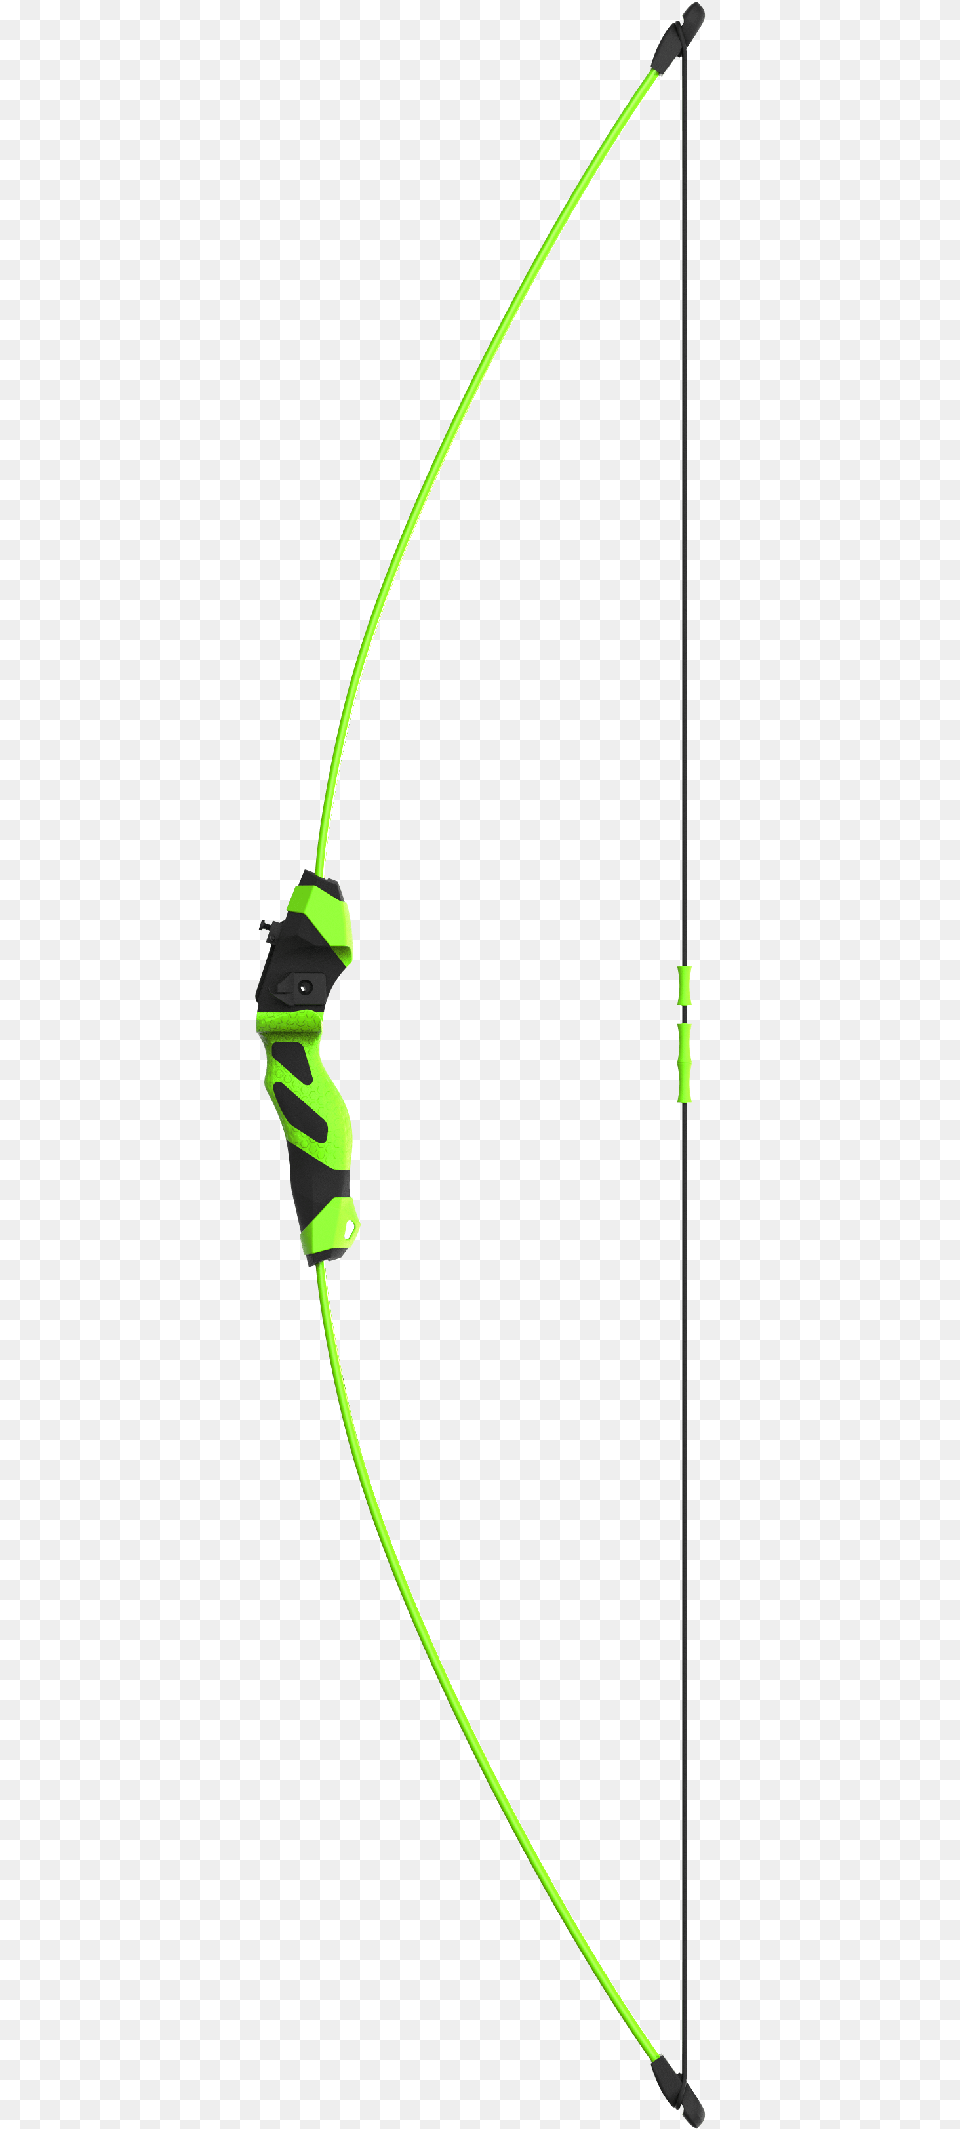 Green Bow And Arrow, Light, Acrobatic, Person, Pole Vault Free Transparent Png